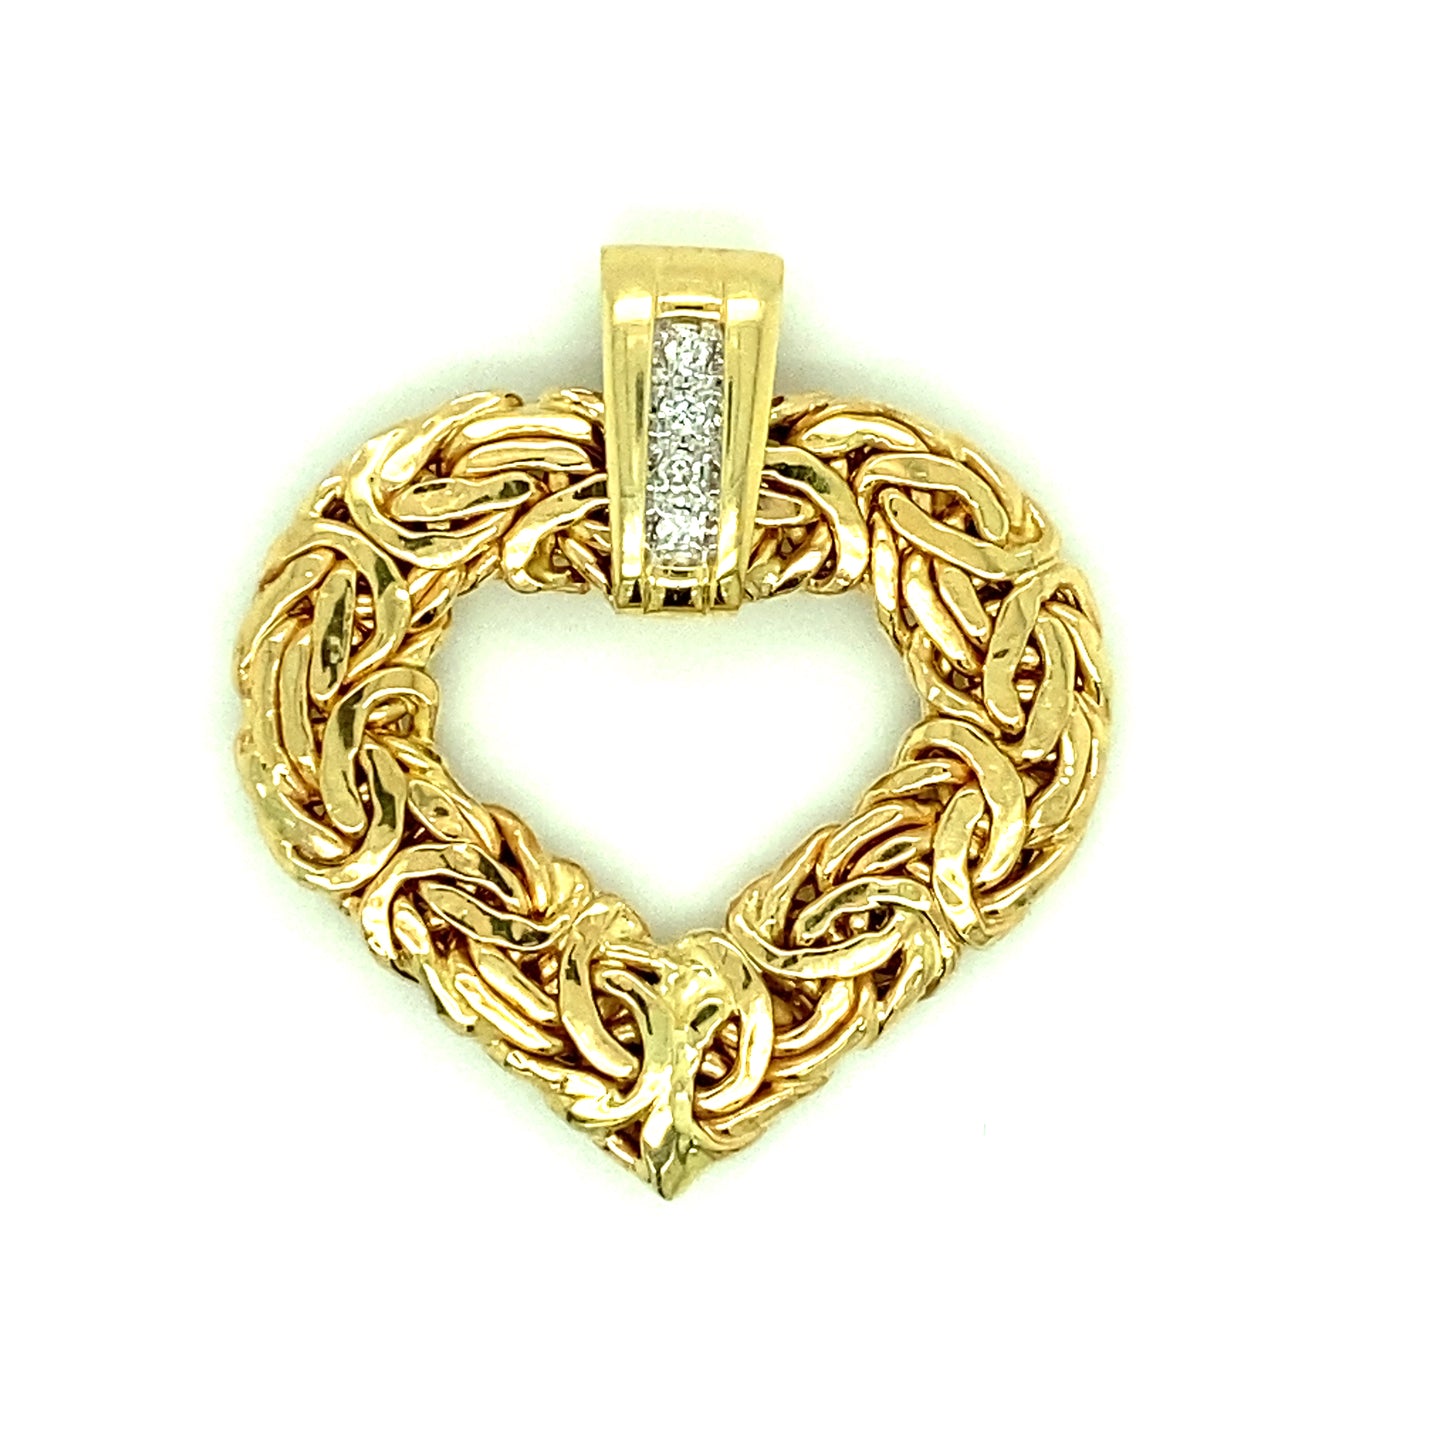 Circa 1980s Byzantine Style Heart Pendant with Diamonds in 14K Gold